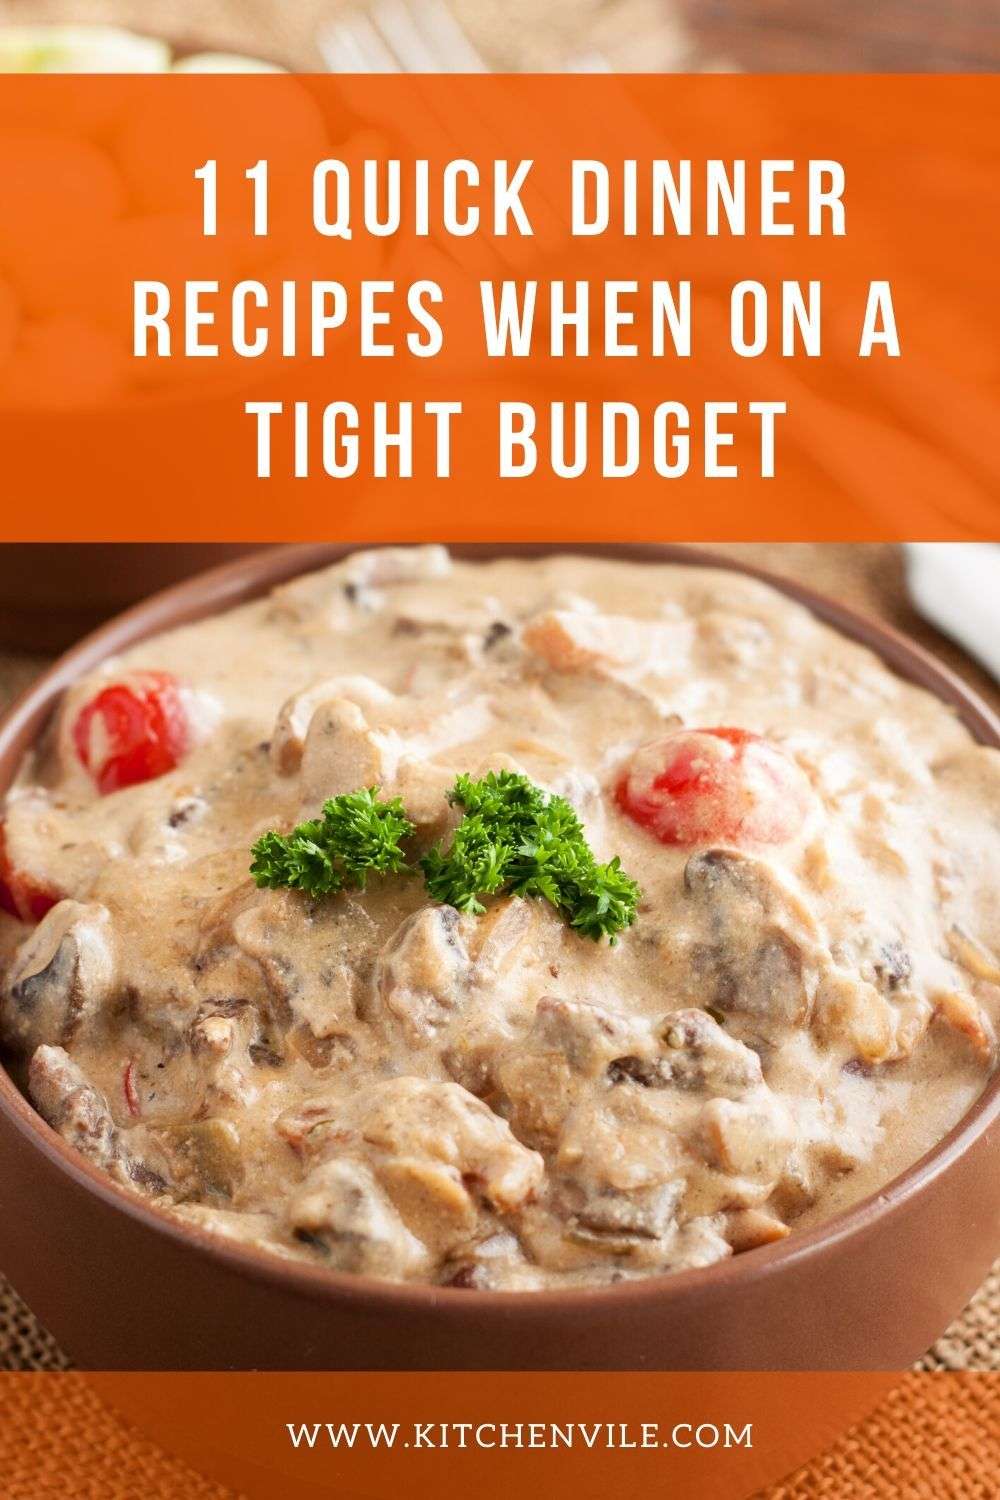 11 Quick Dinner Recipes When On a Tight Budget